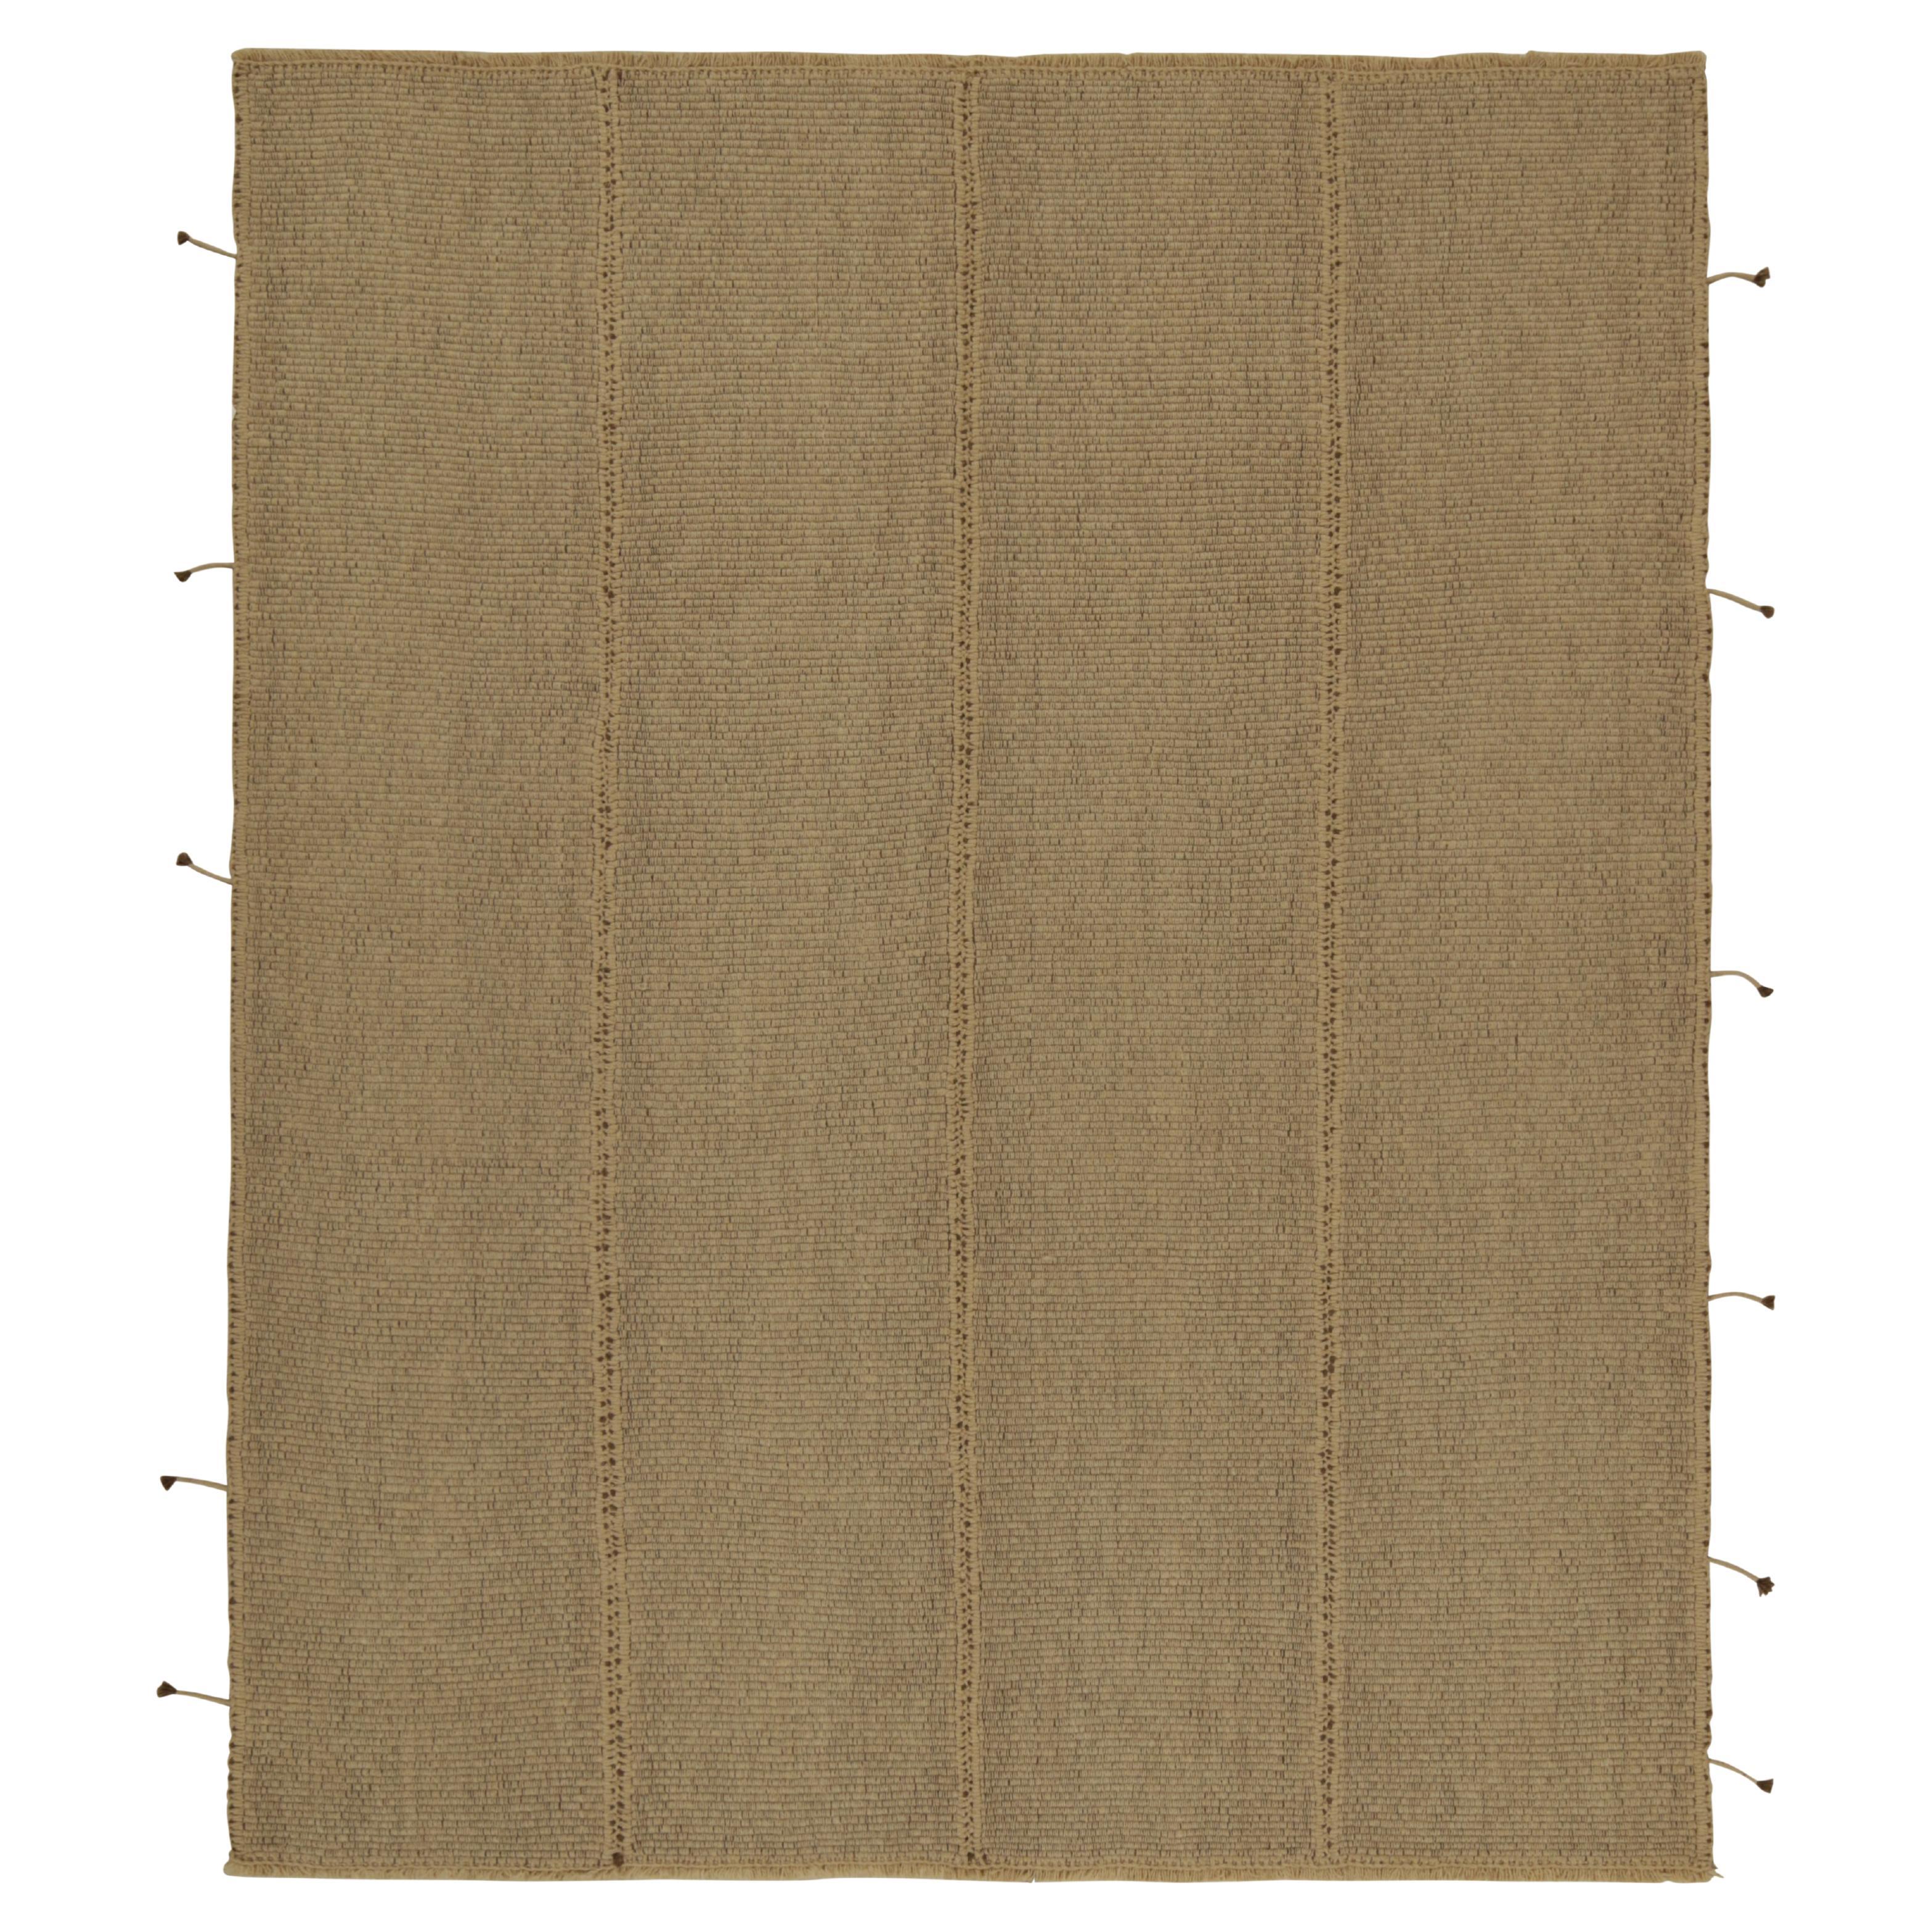 Rug & Kilim’s Contemporary Kilim in Beige-Brown with Muted Stripes For Sale